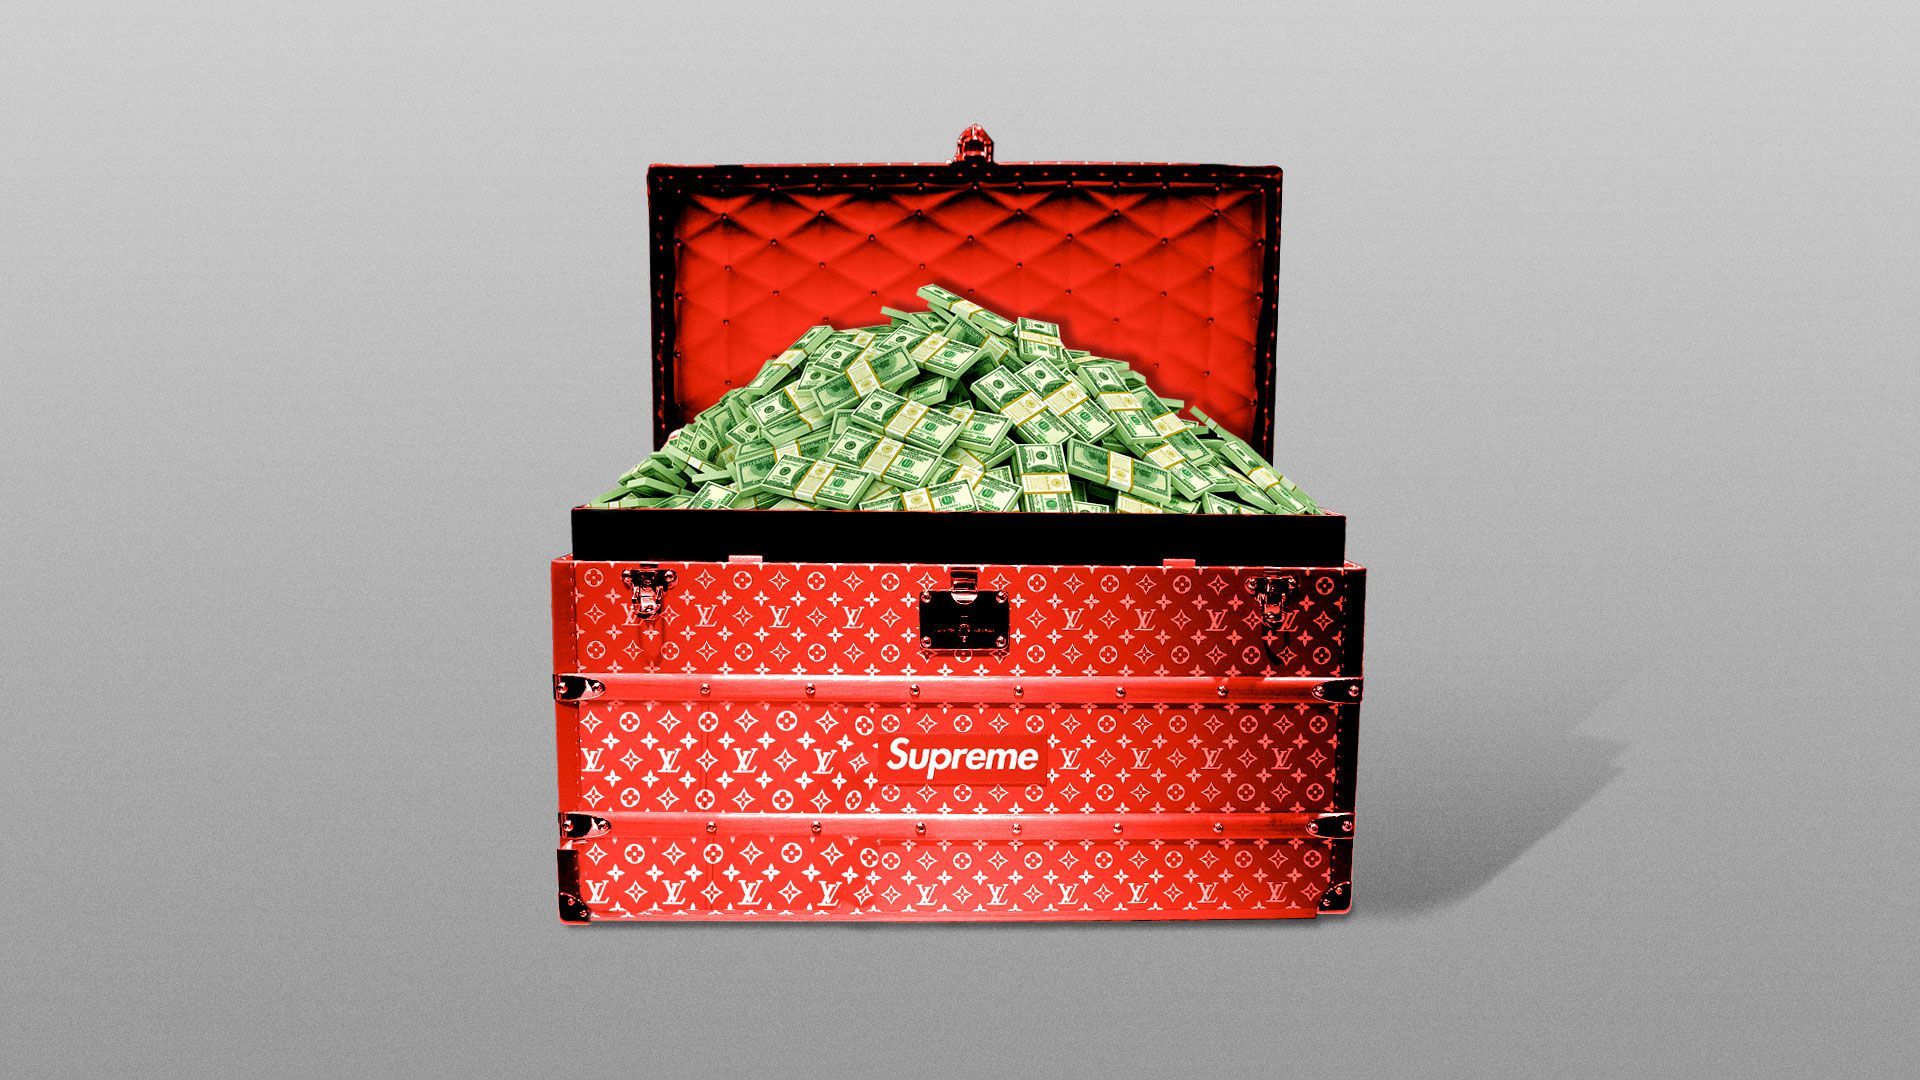 Illustration of a Supreme travel case filled with a pile of money